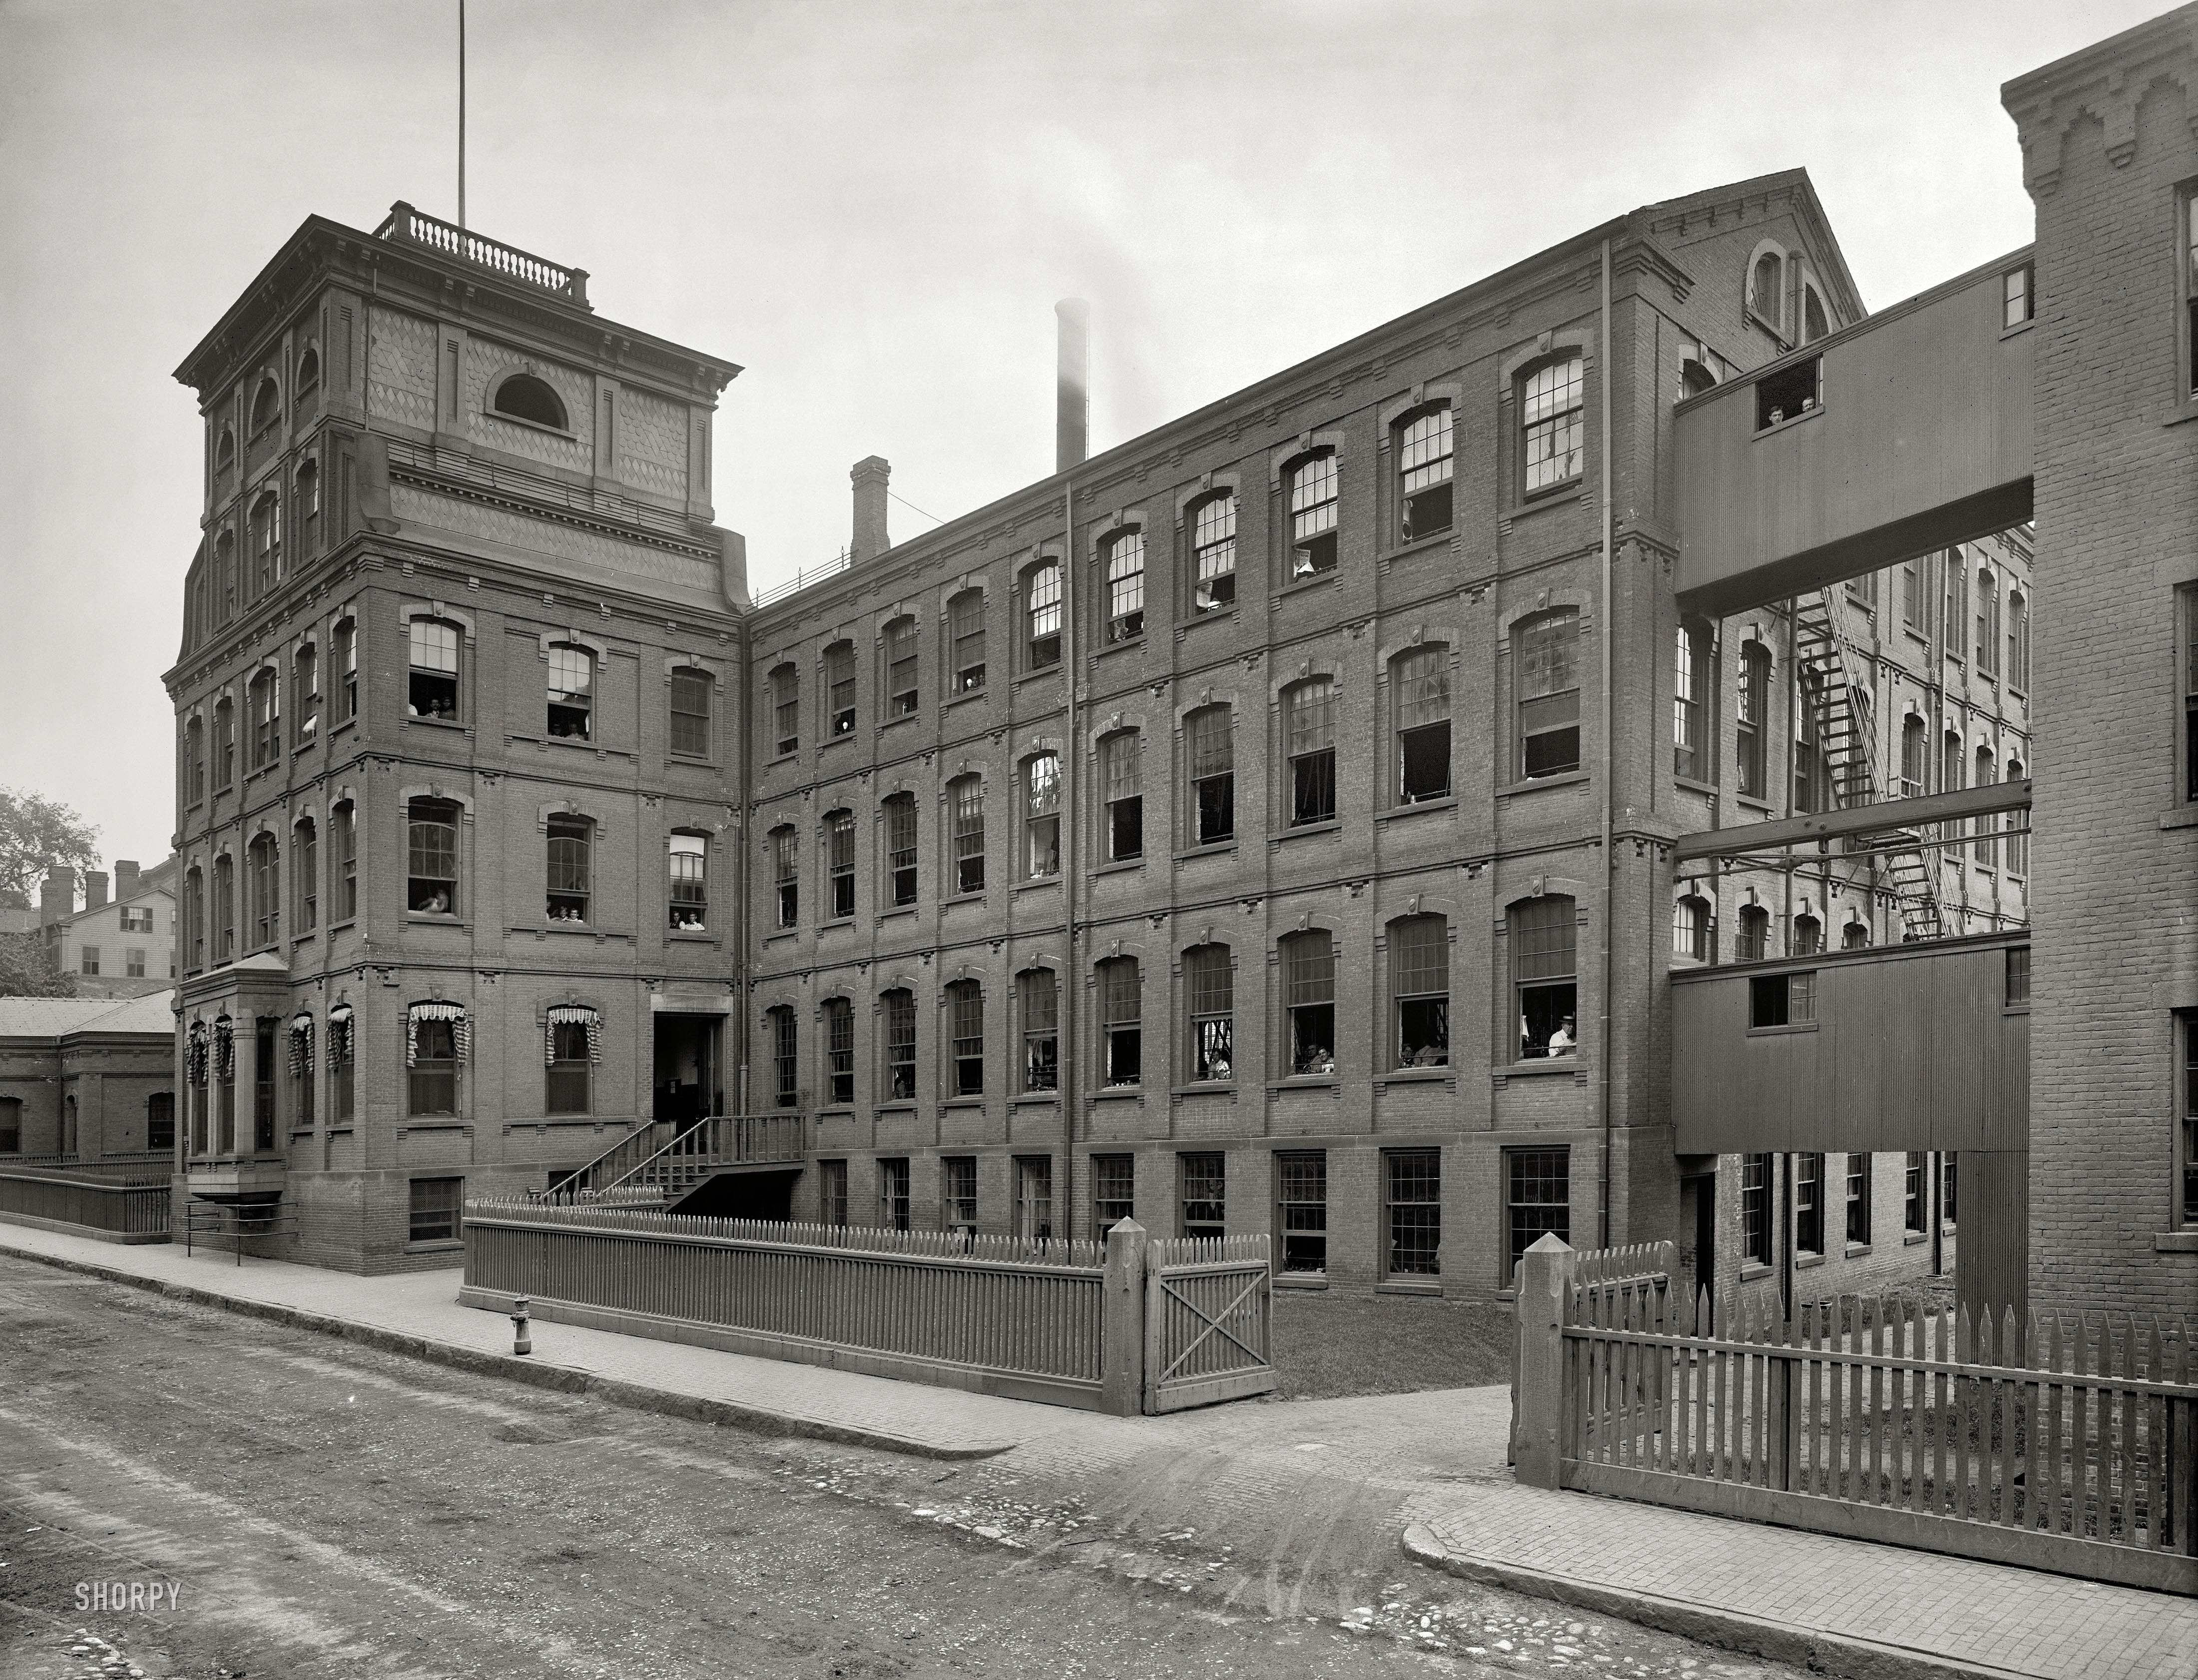 Springfield, Massachusetts, circa 1908. "Smith & Wesson factory." 8x10 inch dry plate glass negative, Detroit Publishing Company. View full size.